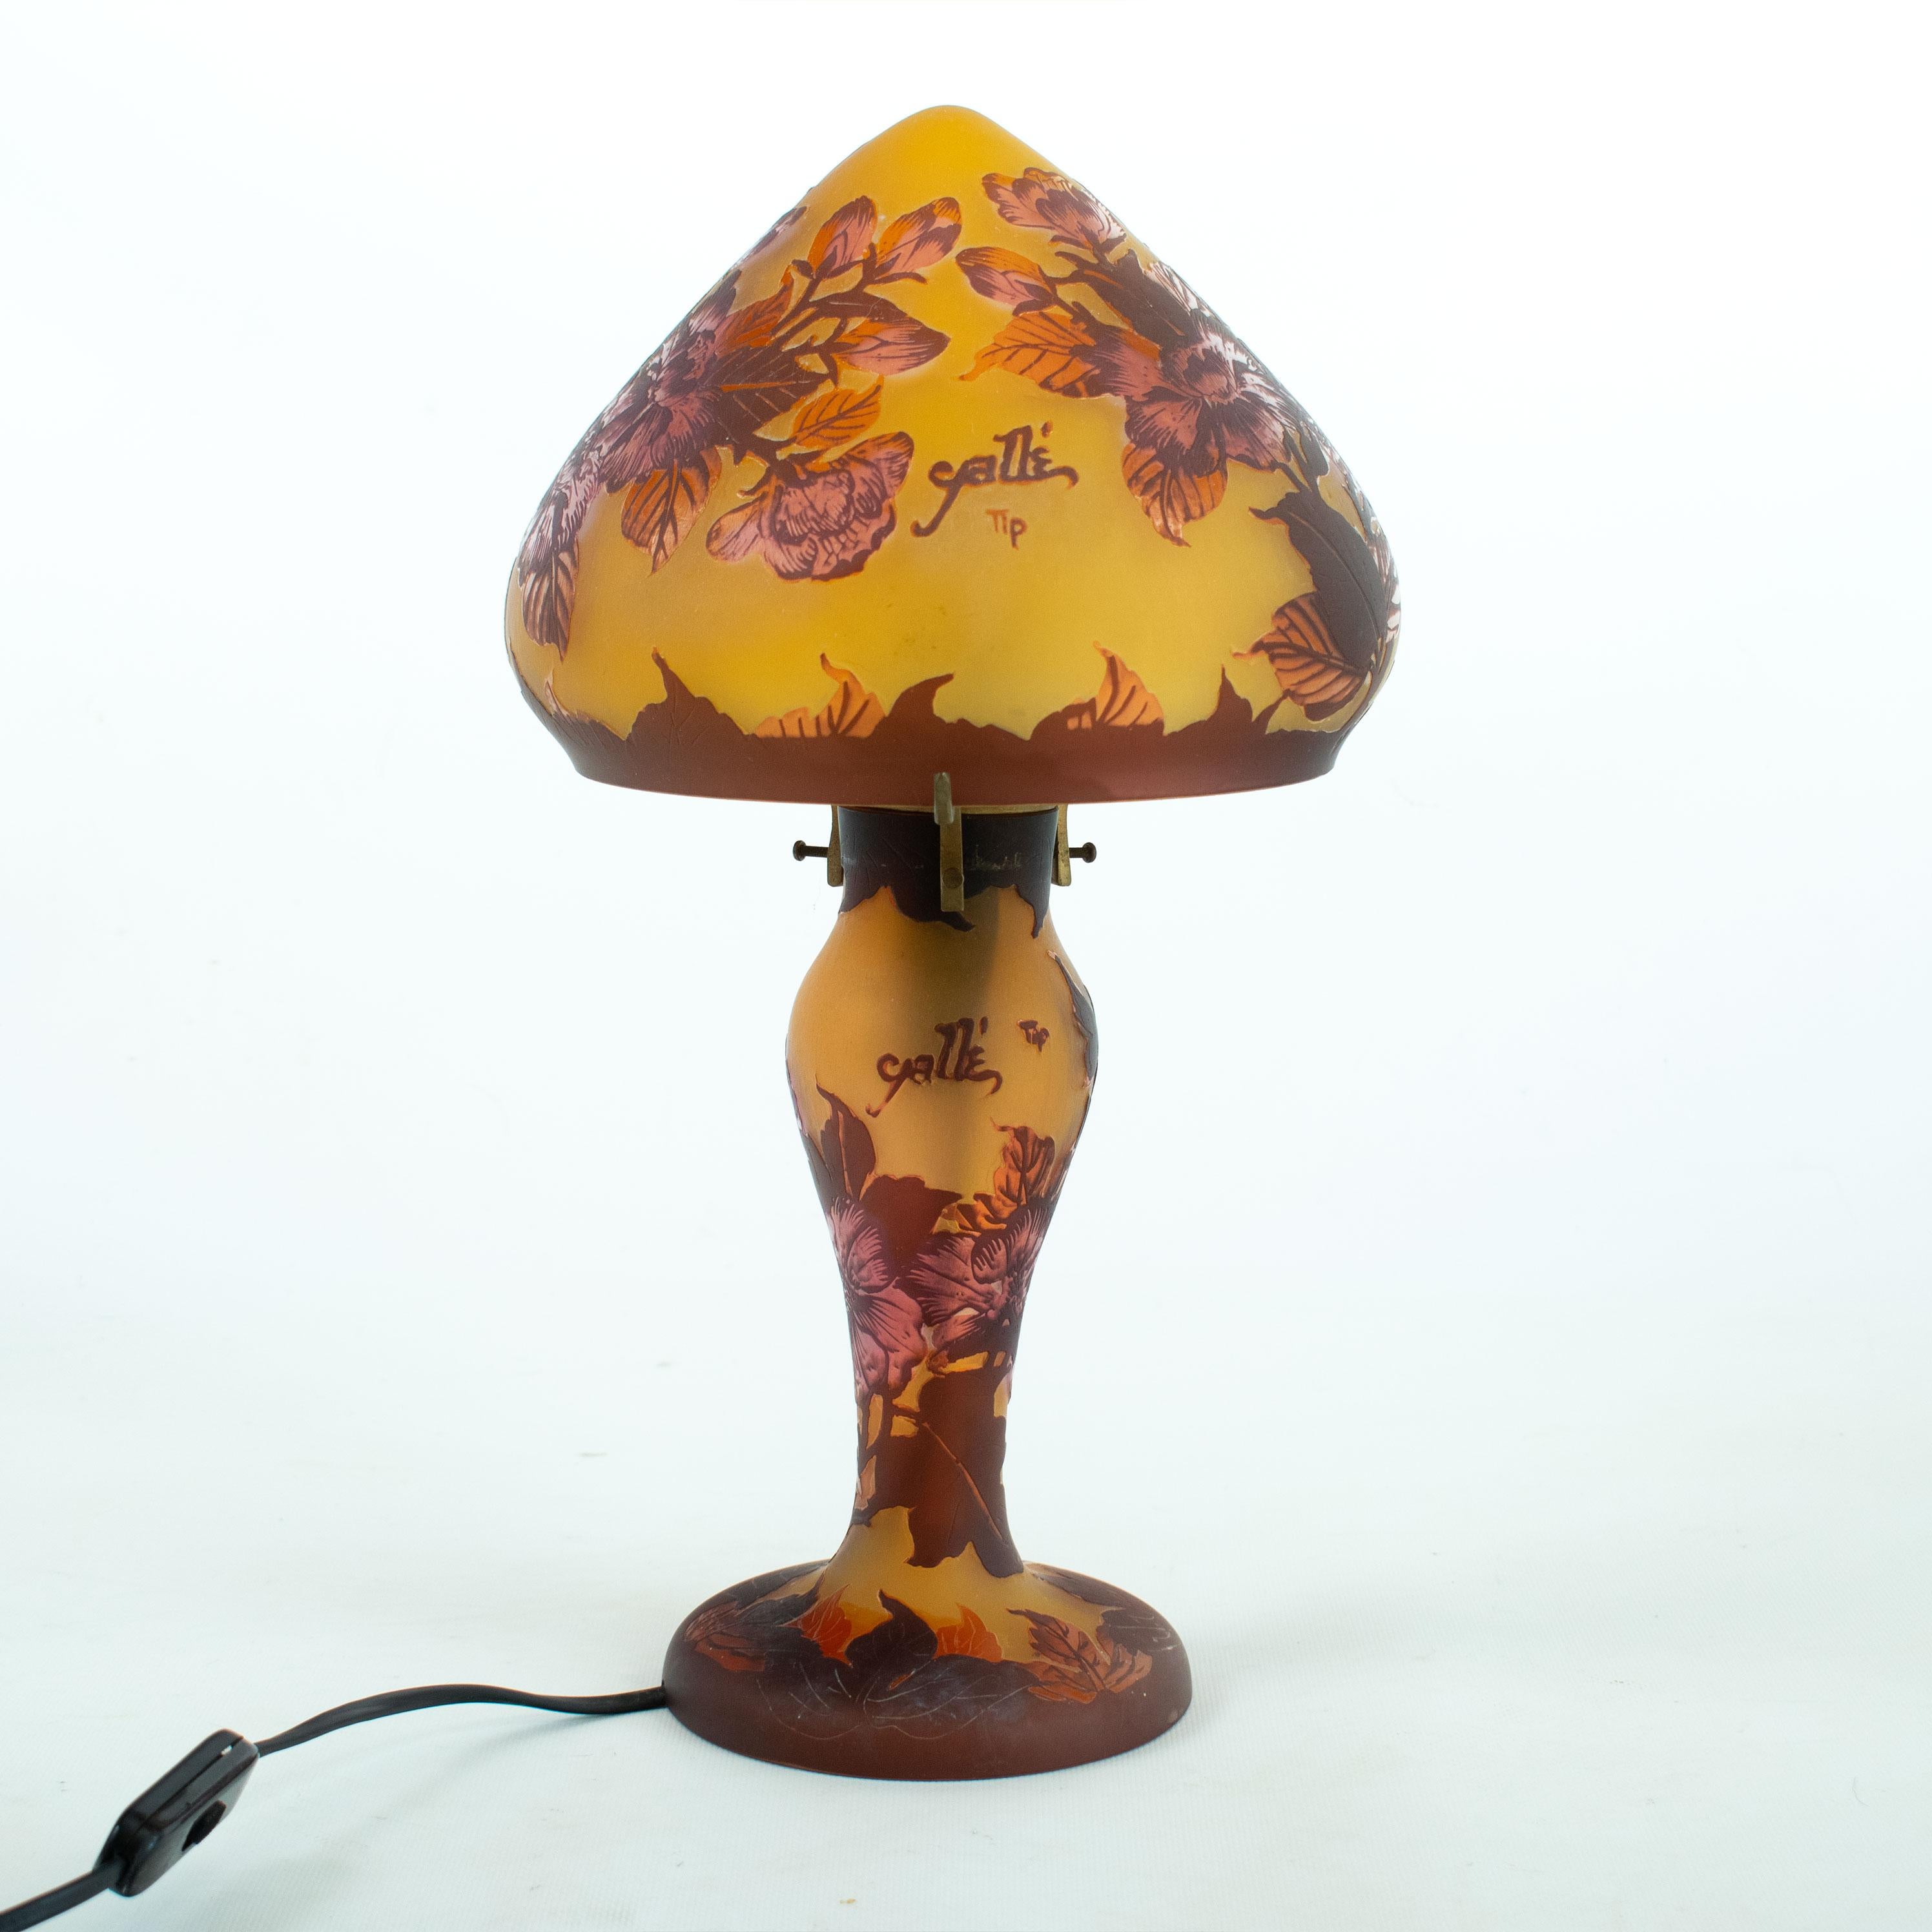 Gallè Tip - Art Nouveau Mushroom Lamp in multilayer glass

Superb Mushroom Lamp decorated with foliage and flowers, tones of pinks and reds on an ocher background. 

Height: 40cm.  Lamp and base signed “Gallé”, accompanied by a “Tip” distinction. 